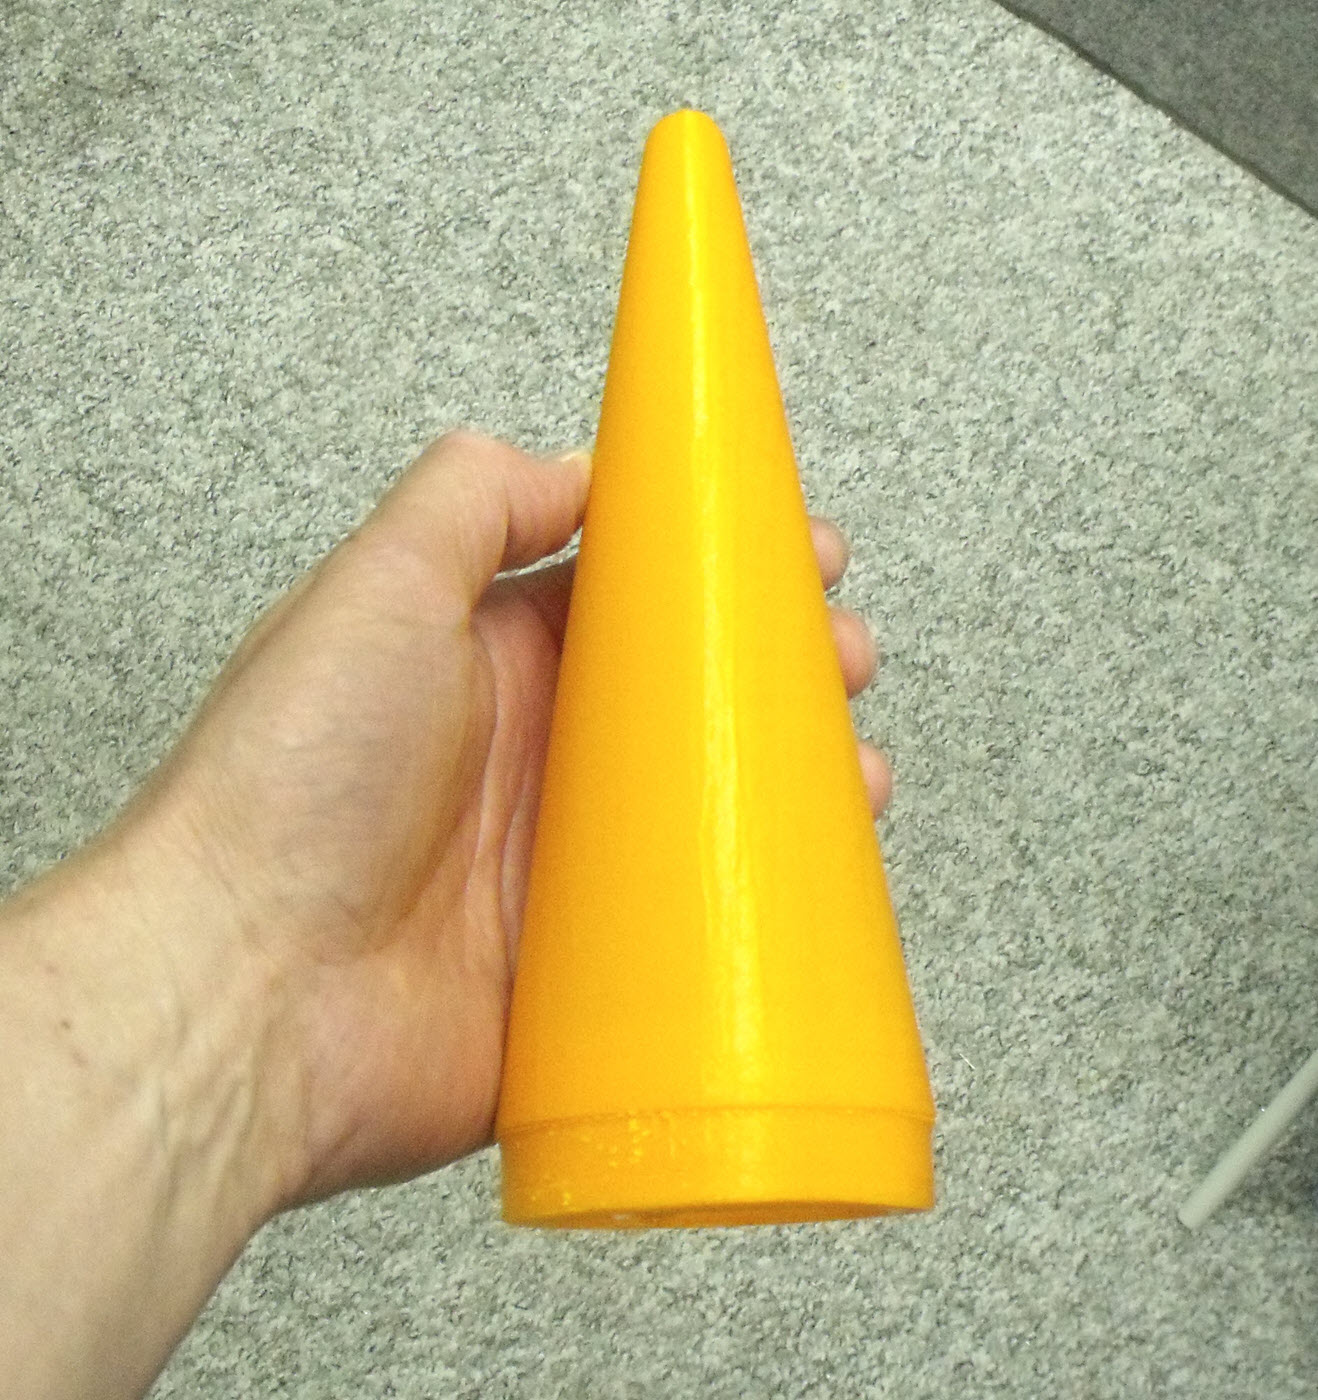 3D printed Xi nosecone